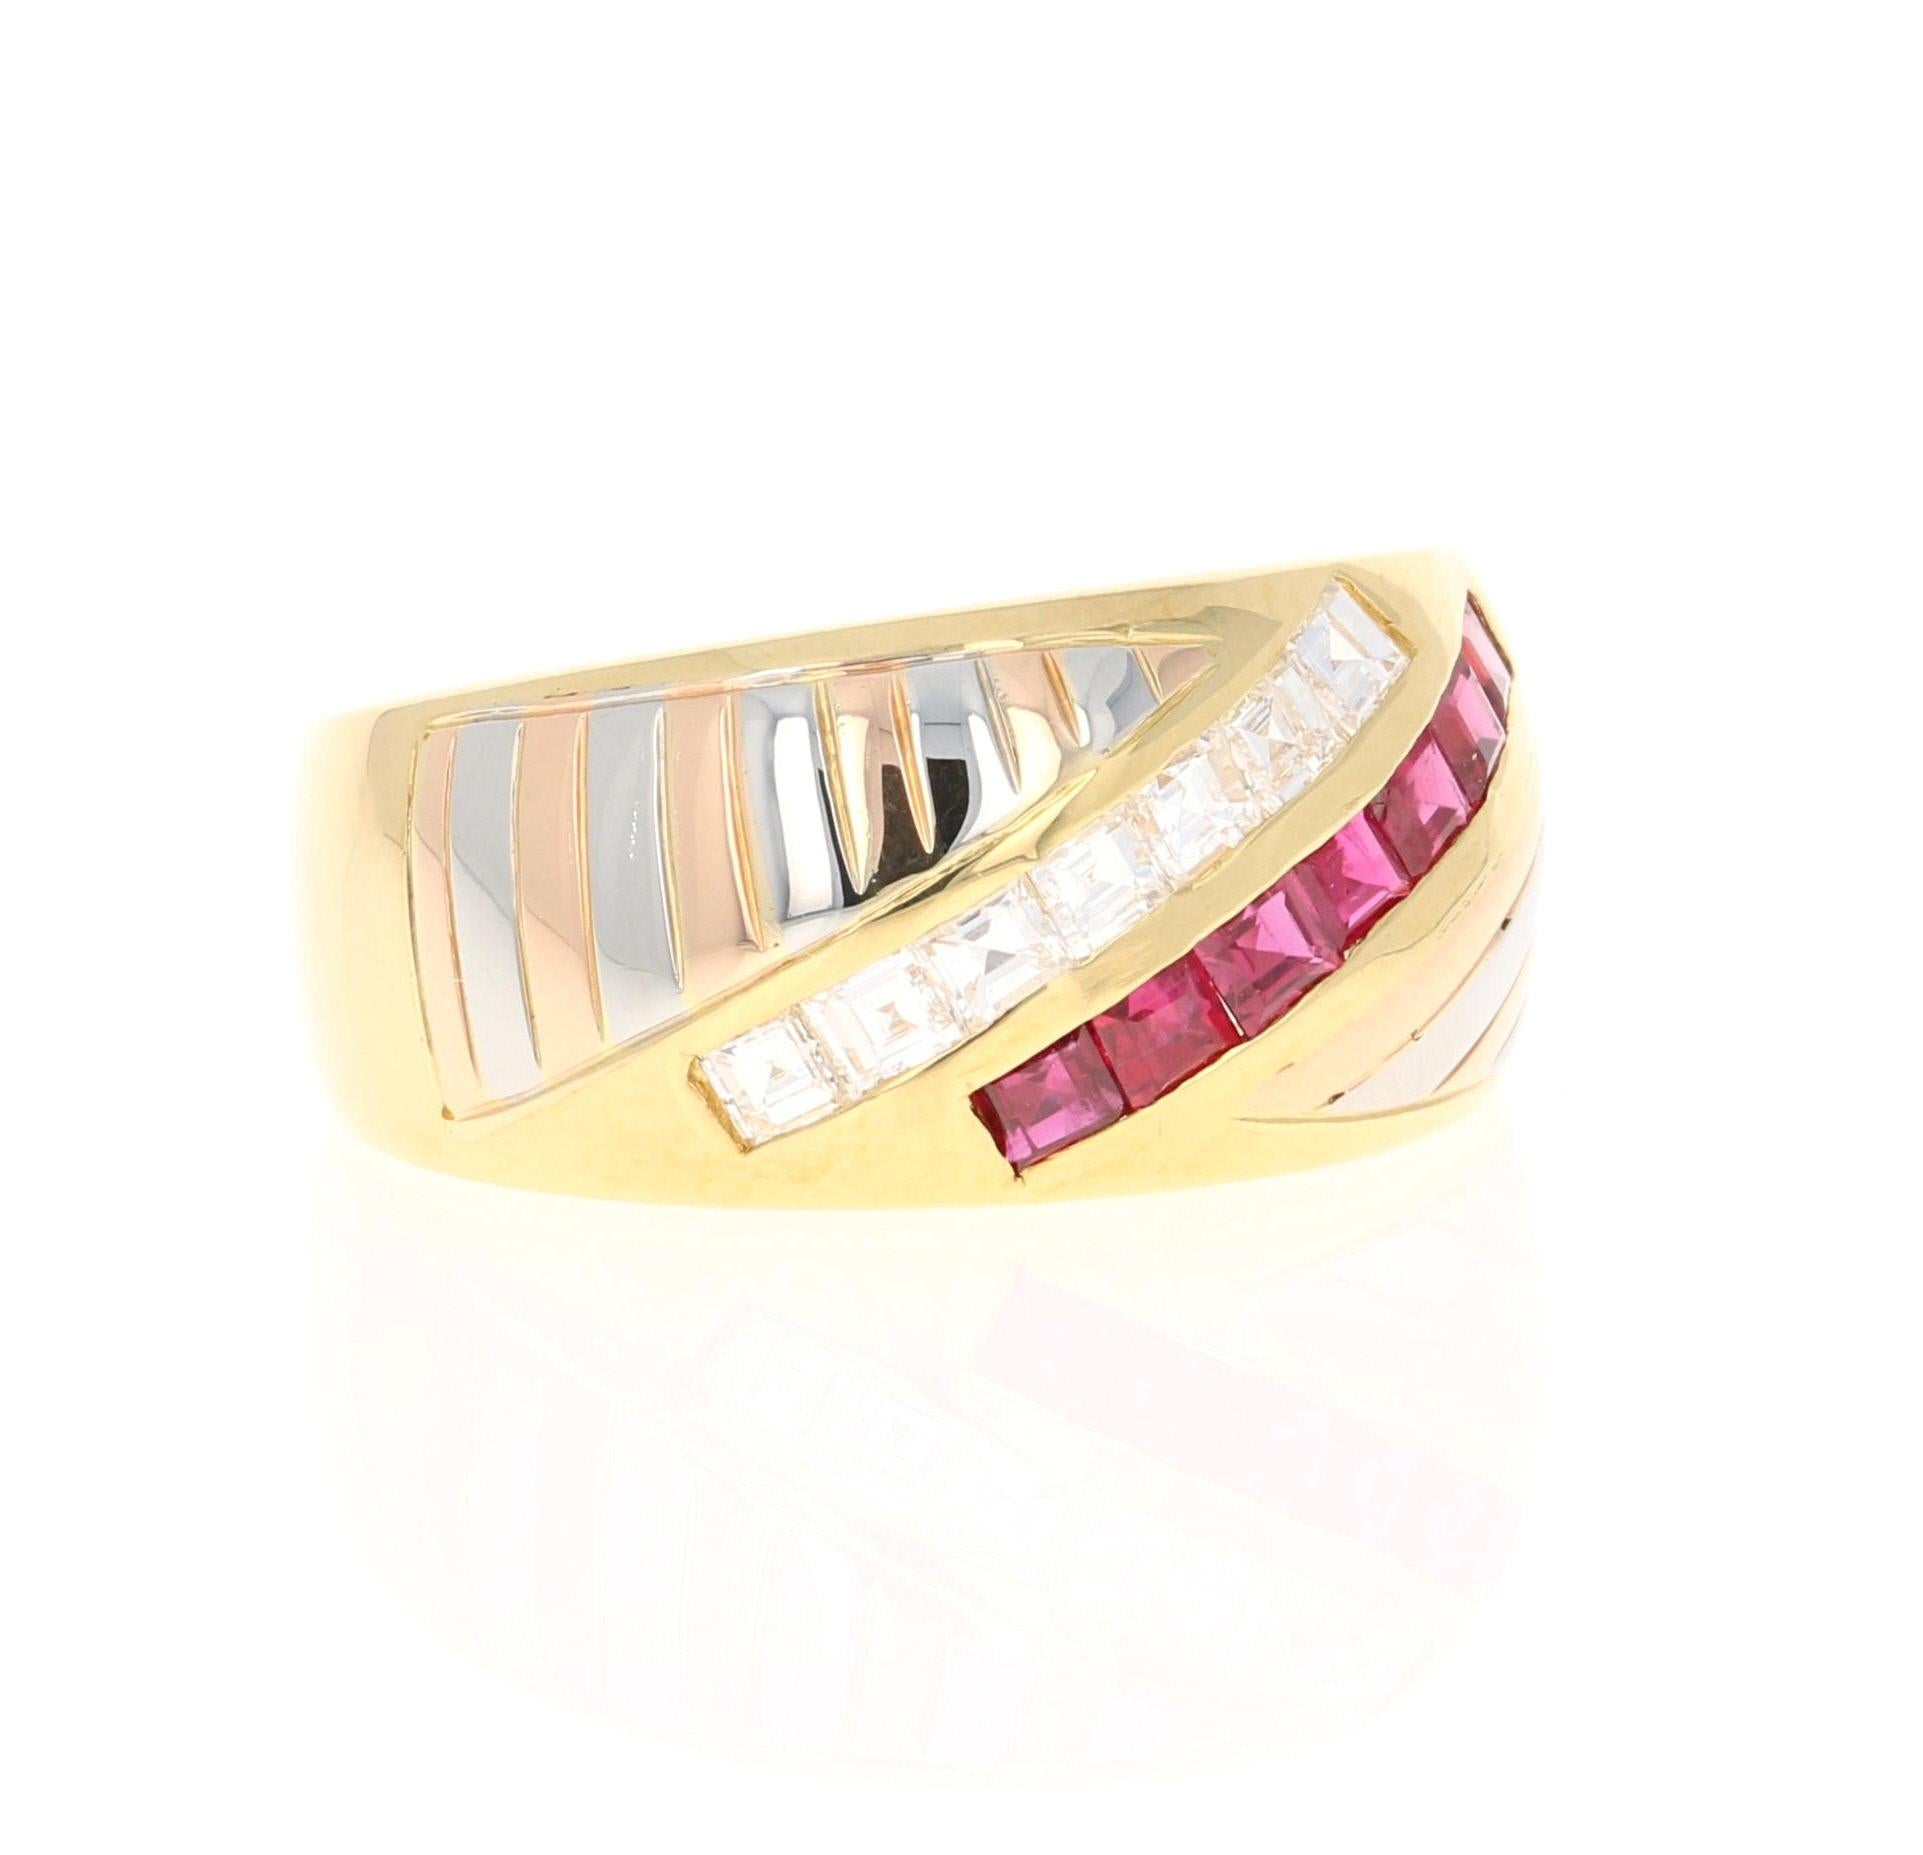 This beautiful ring has 7 Princess Cut Diamonds that weigh 0.48 carats and 7 Square Cut Rubies that weigh 0.40 carats. The total carat weight of the ring is 0.88 carats. 

It is crafted in a trio of gold - 18K white, 18K yellow and 18K rose gold and